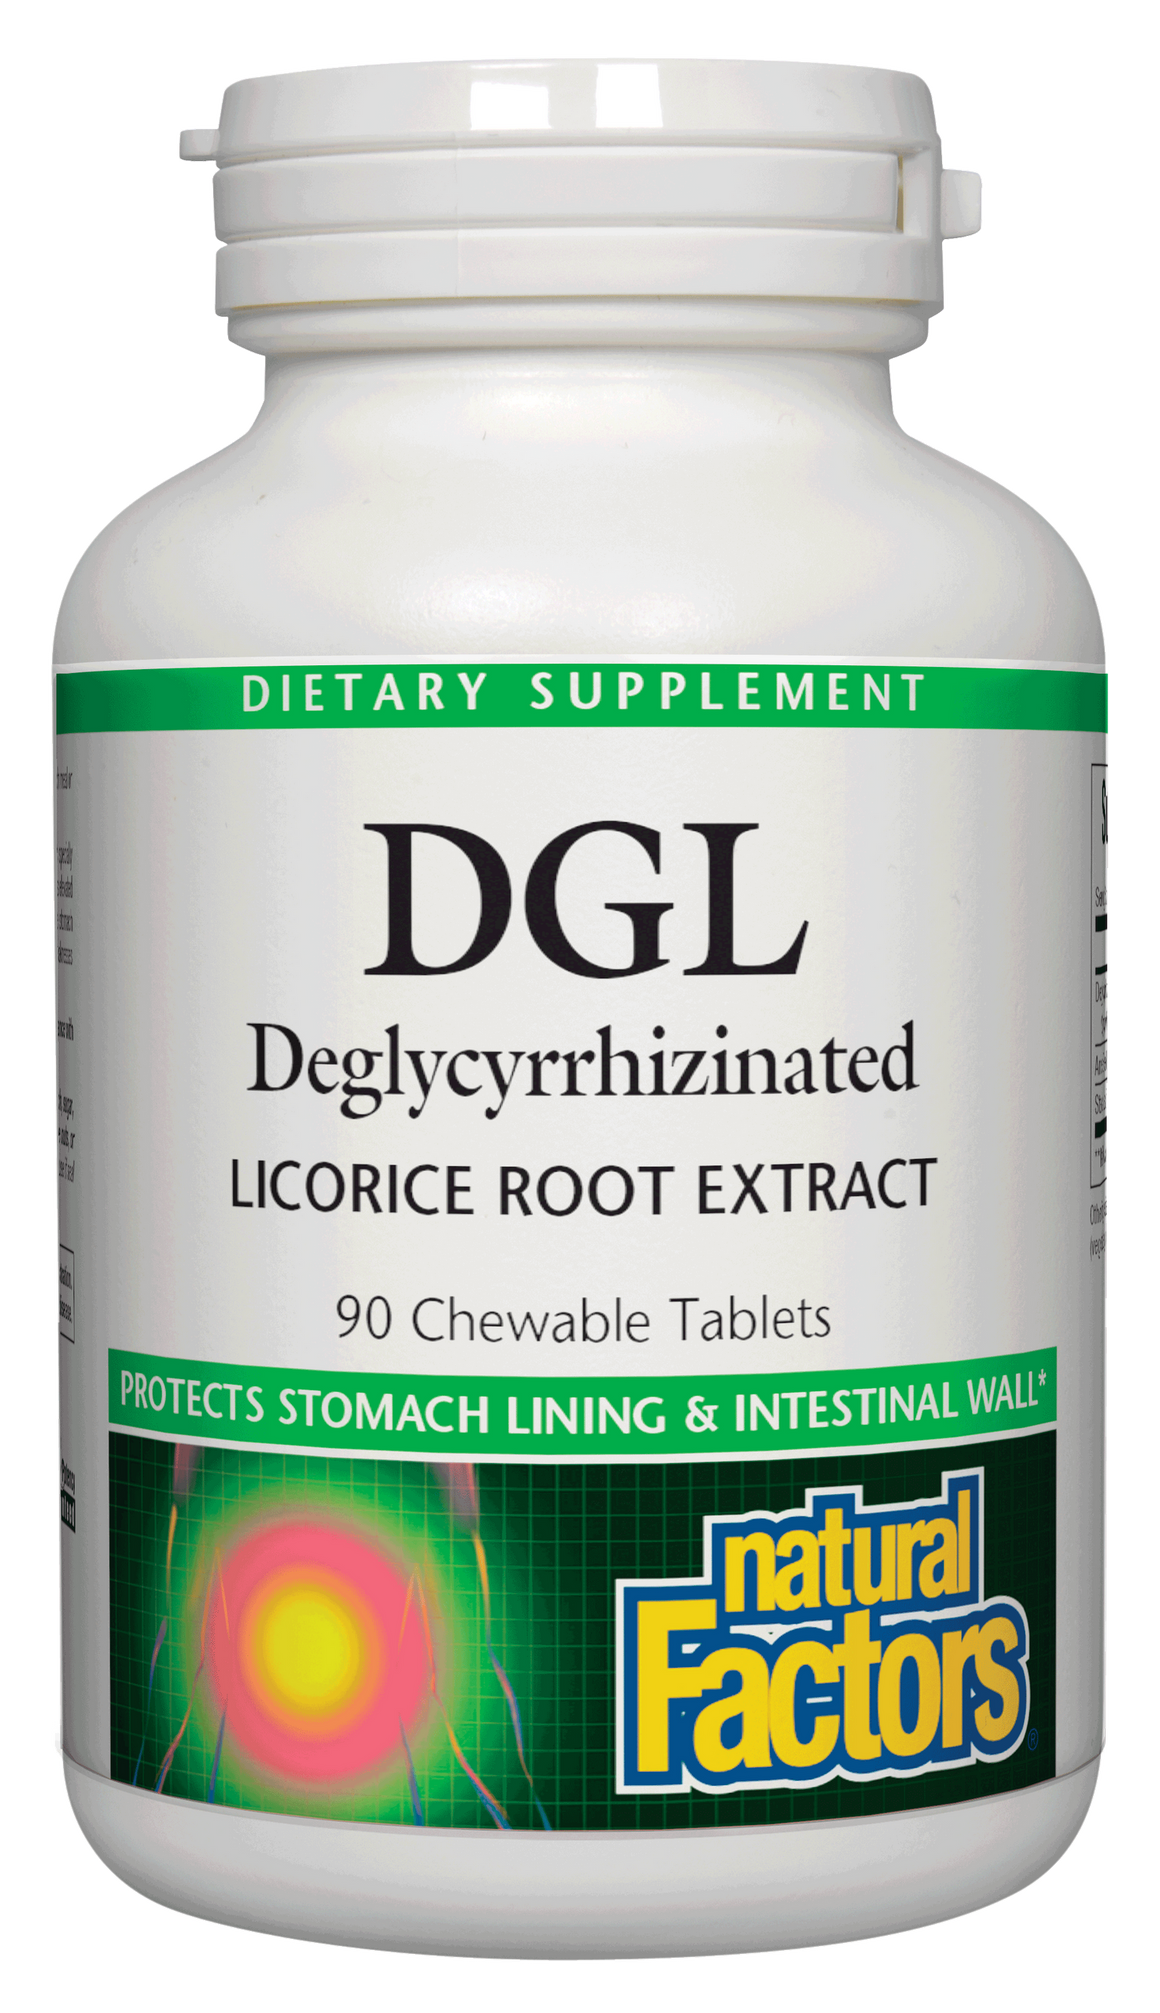 A bottle of Natural Factors DGL 400 mg · Deglycyrrhizinated Licorice Root Extract